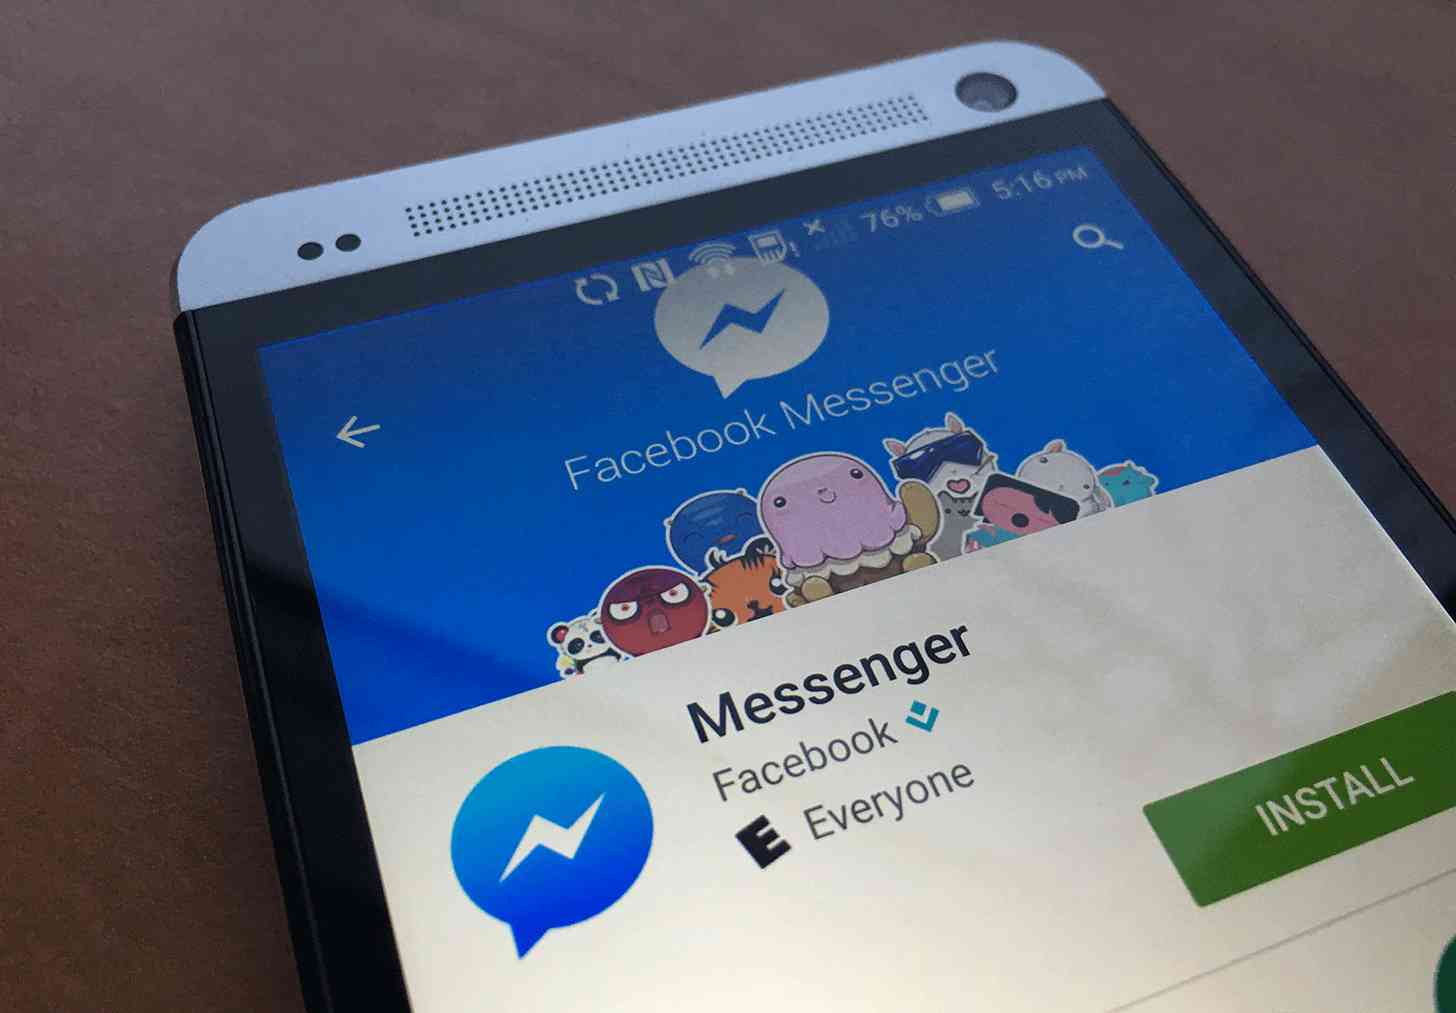 Facebook Messenger Android app